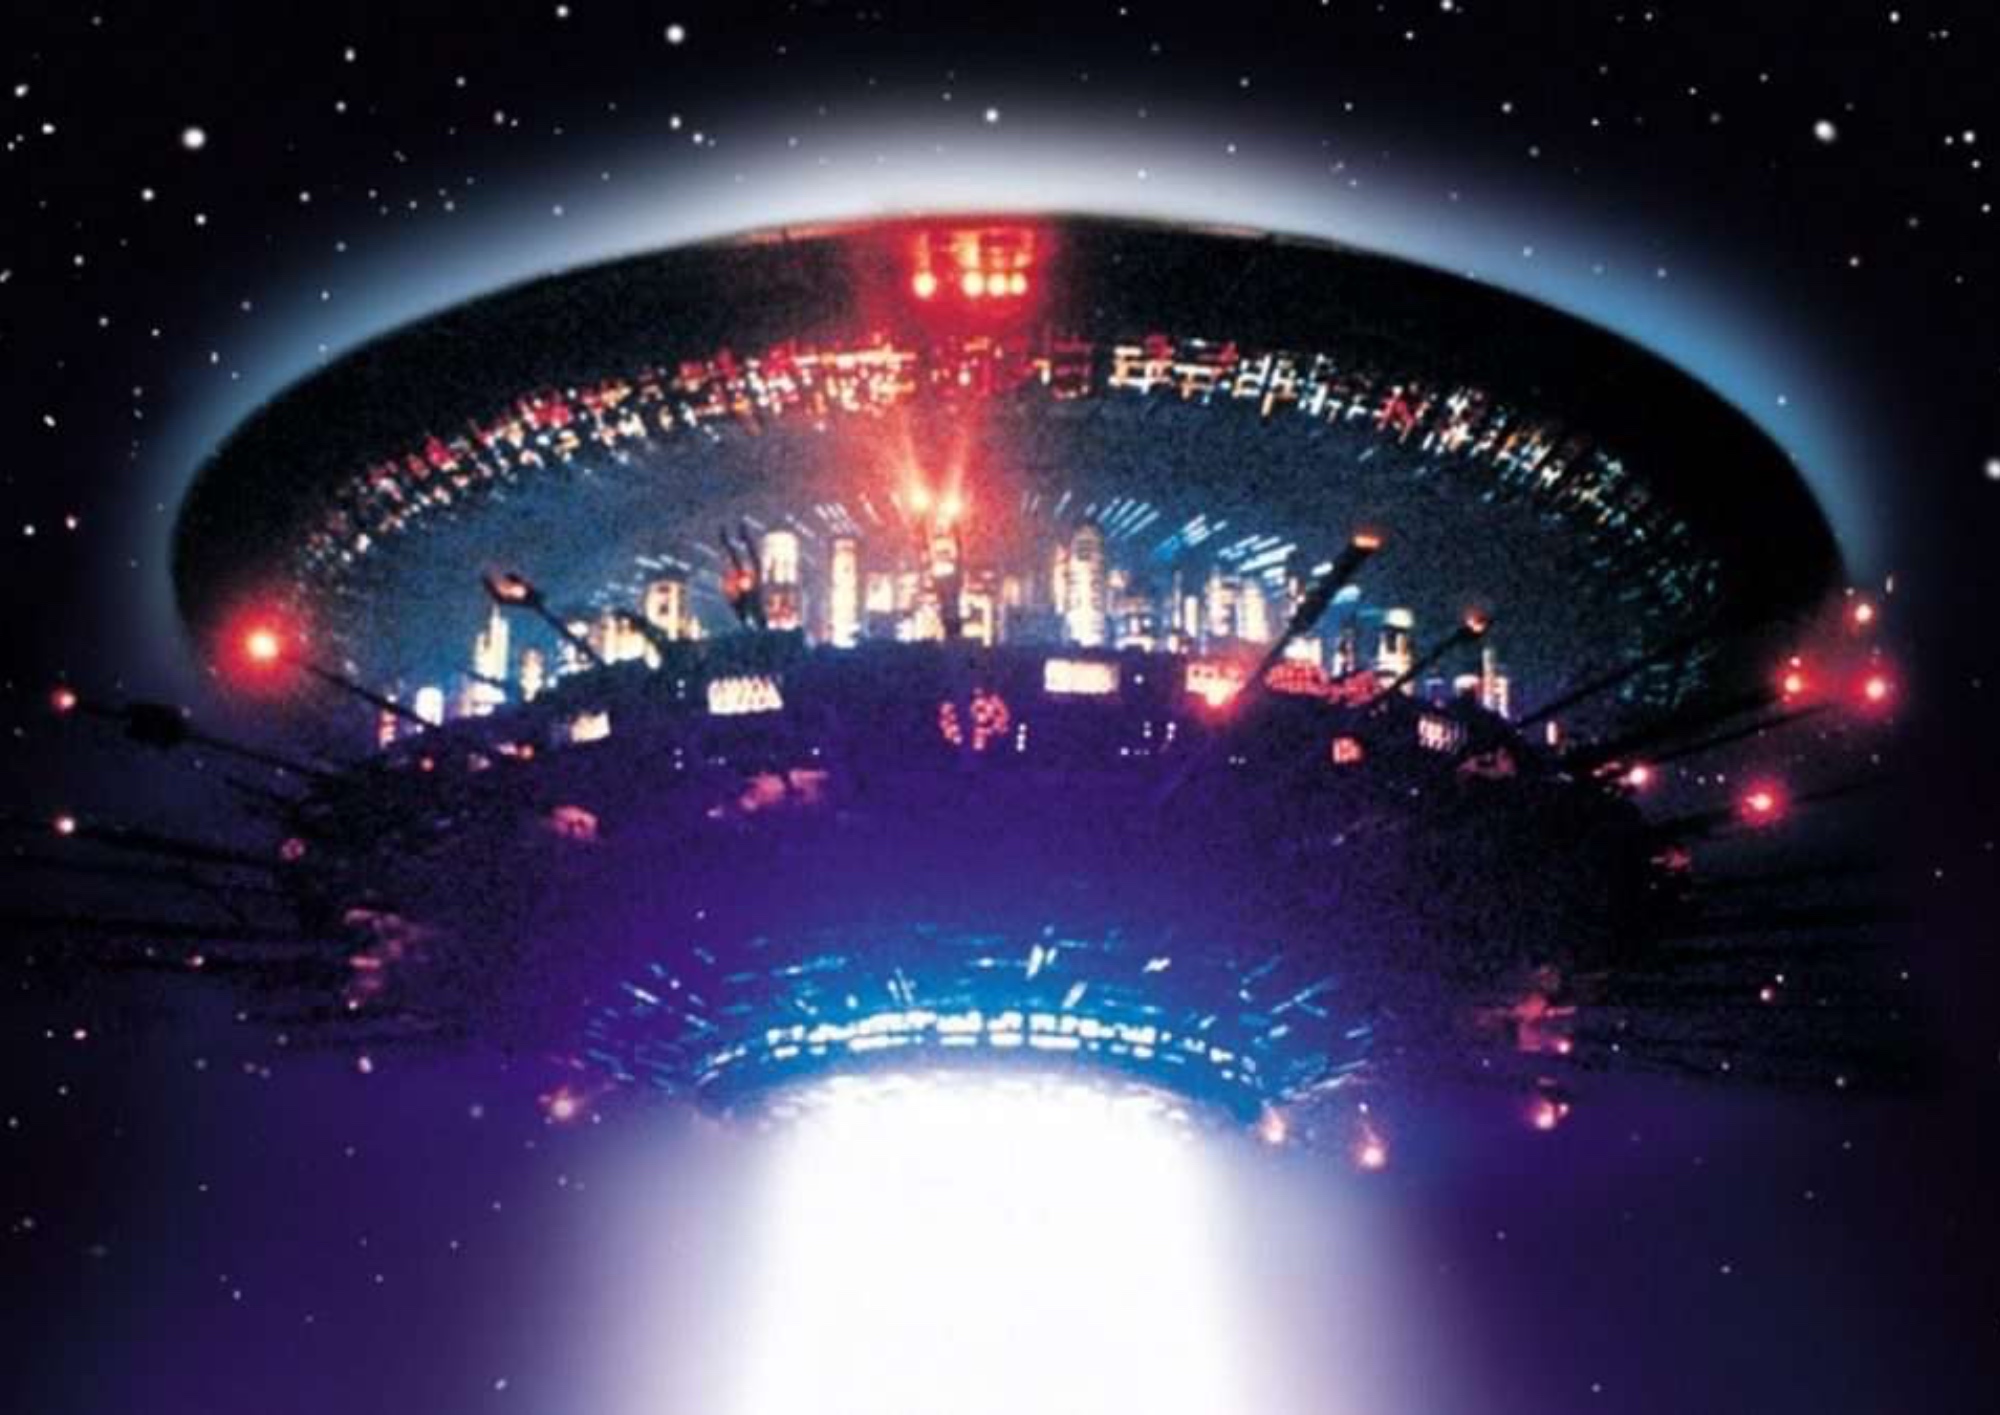 Image from the motion picture Close Encounters of the Third Kind